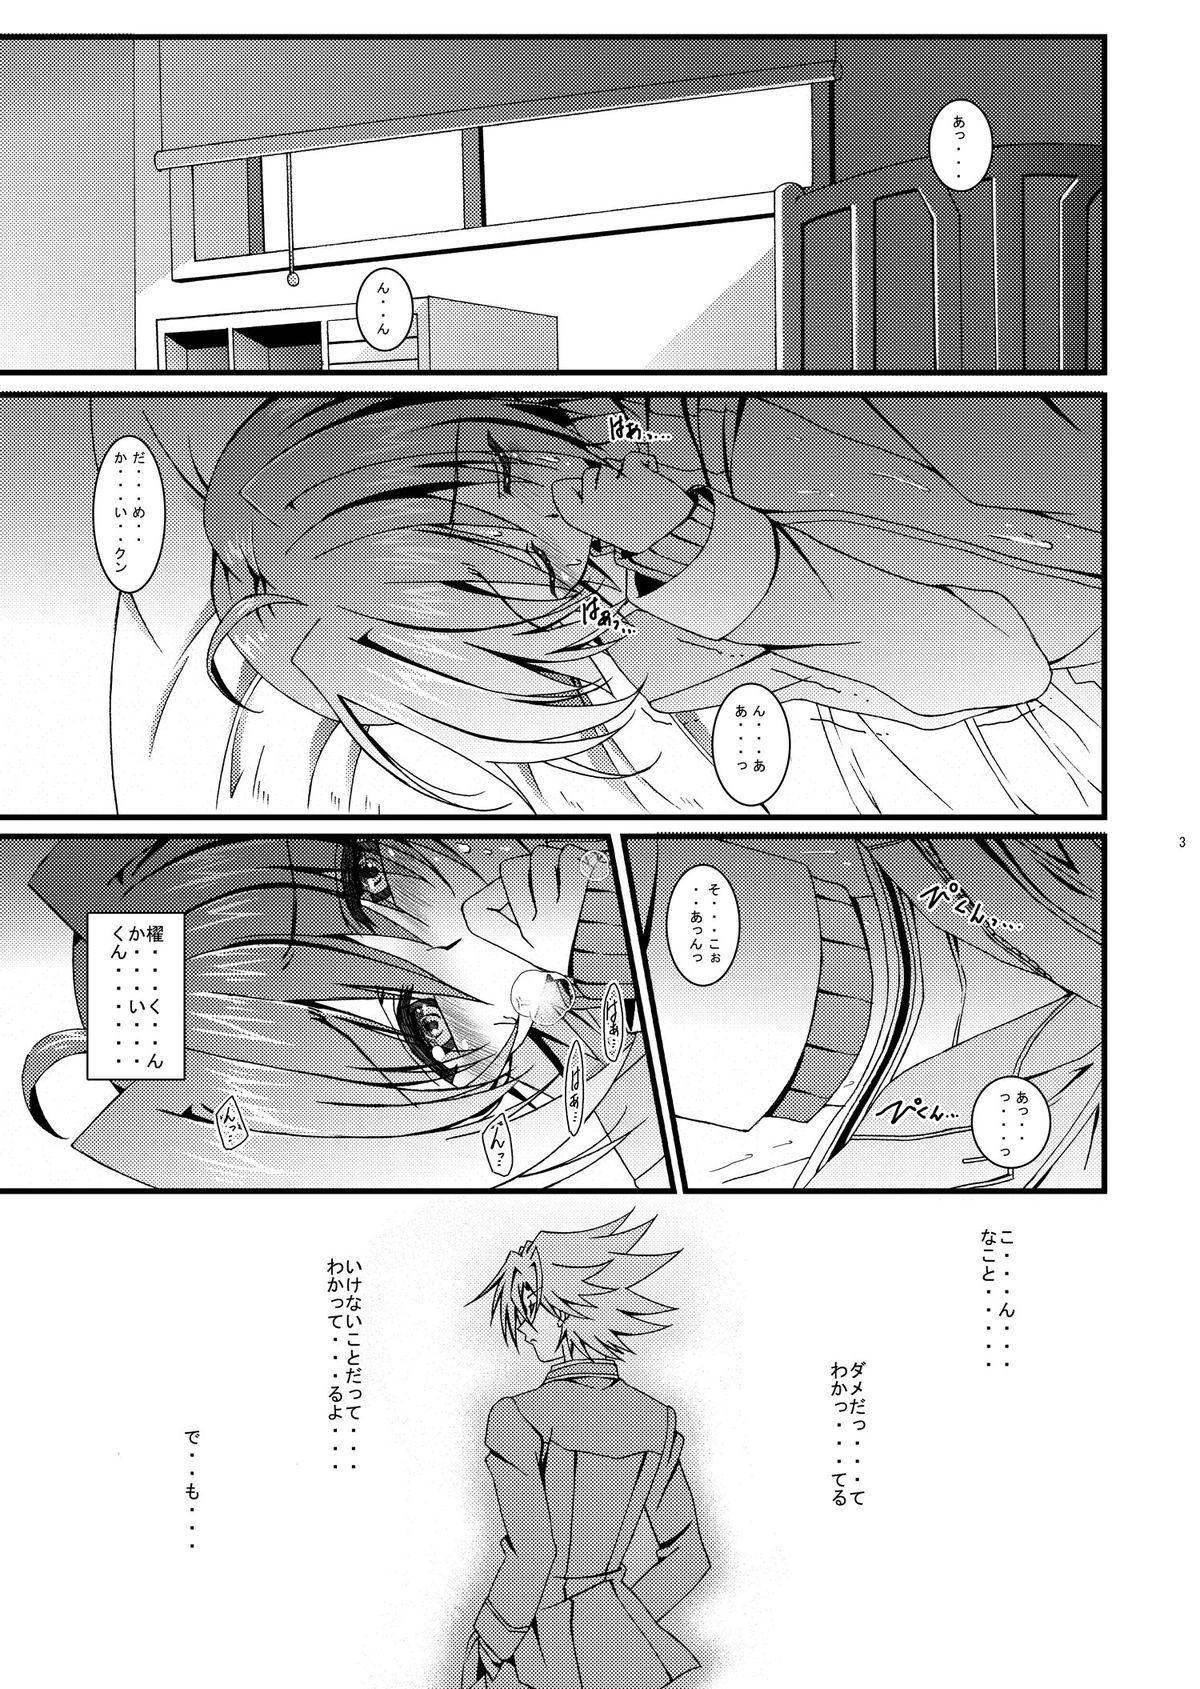 Young Petite Porn Aichi kun Syndrome - Cardfight vanguard Gay - Page 4